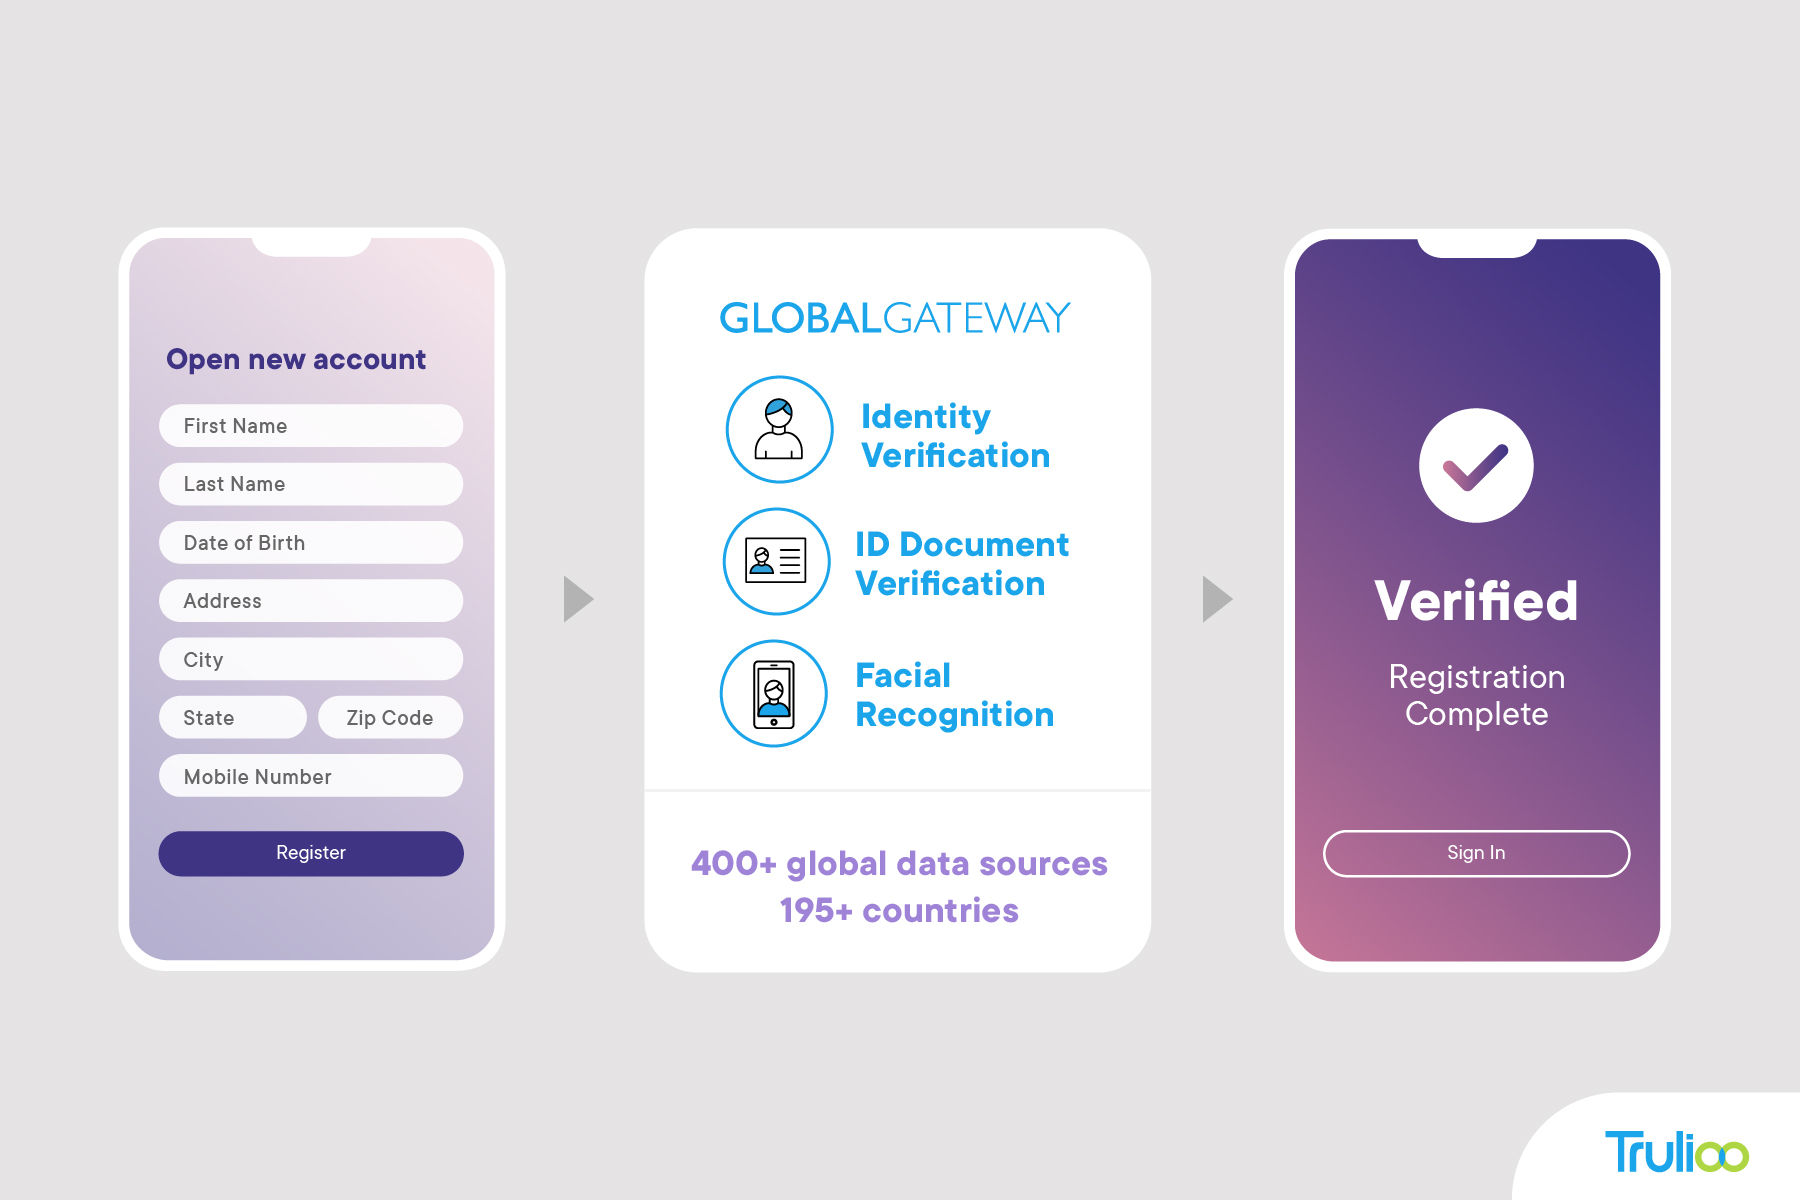 Trulioo makes identity verification during account opening seamless and secure.